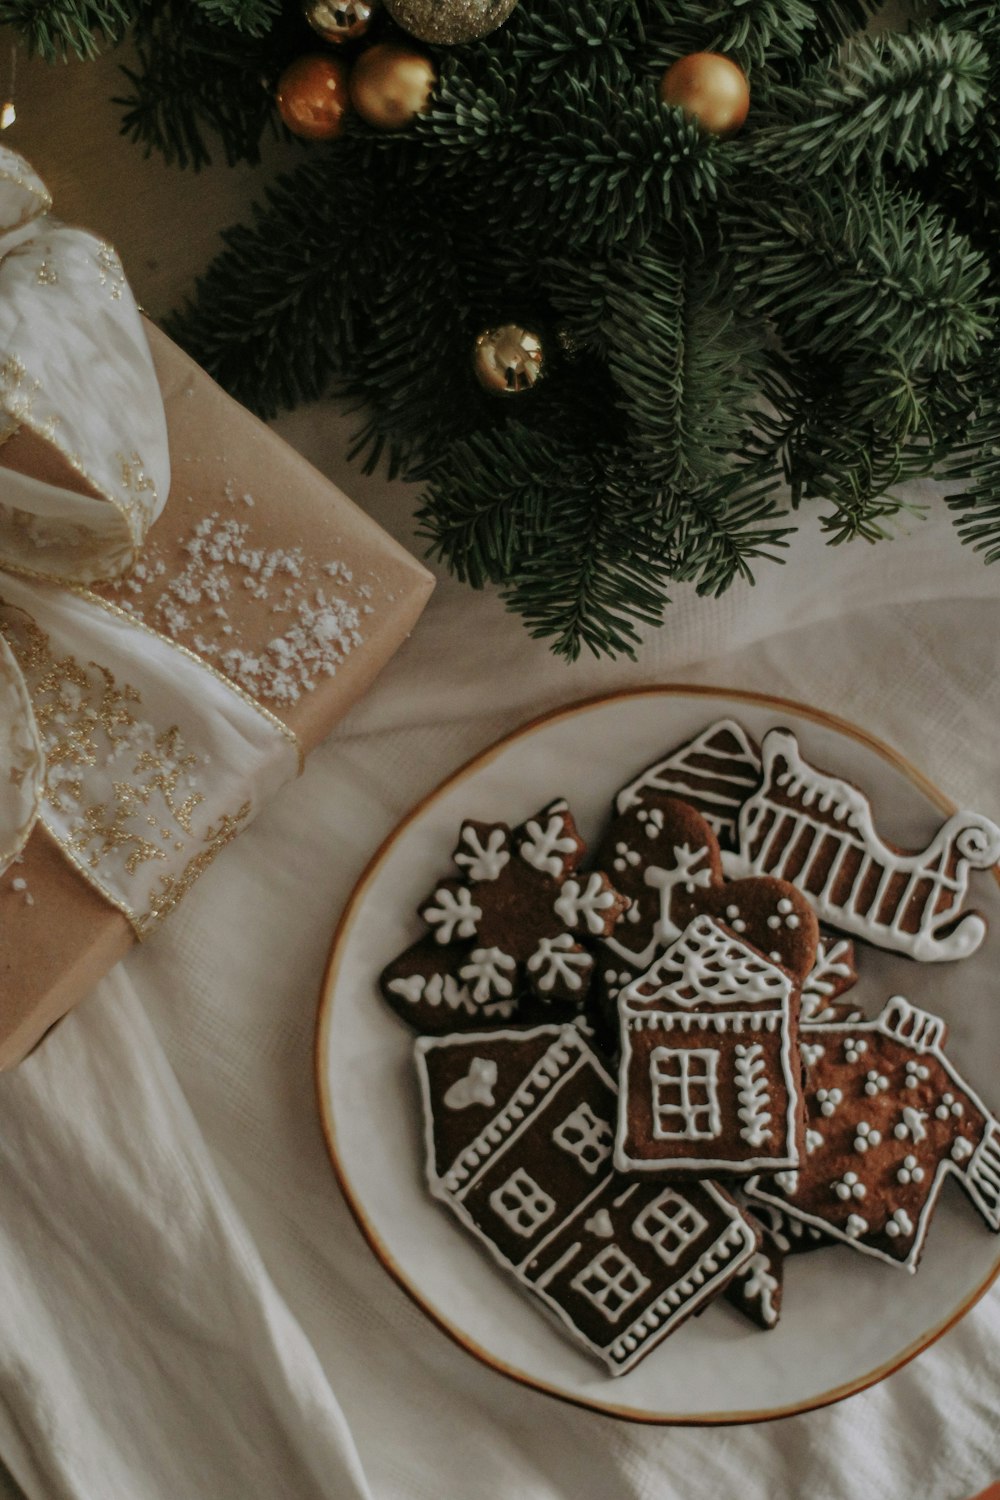 a plate of cookies next to a christmas tree